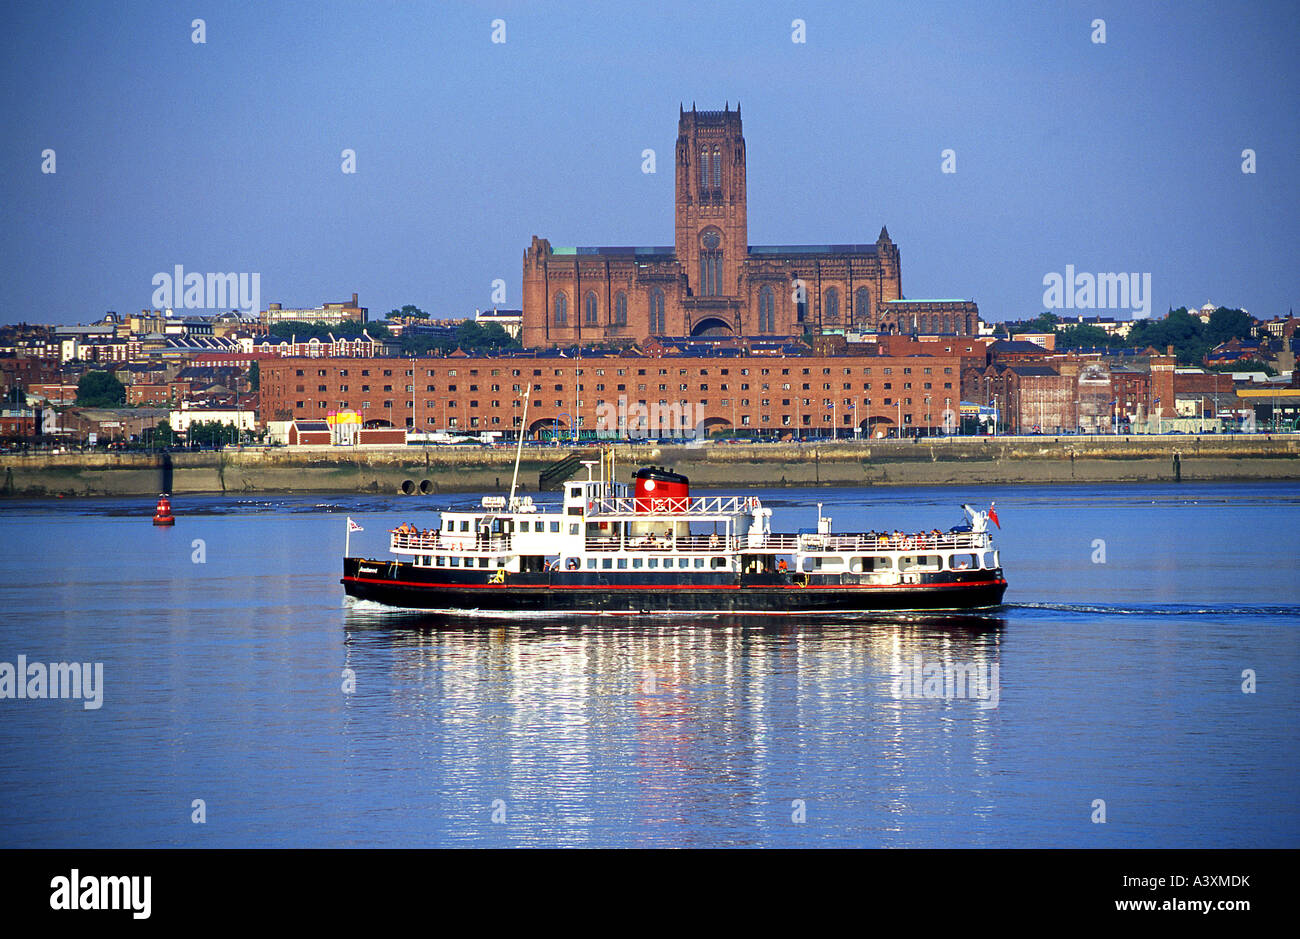 Mersey Ferry Crossing the River Mersey in front of the Anglican Cathedral and Albert Dock, Liverpool, Merseyside, England, UK Stock Photo